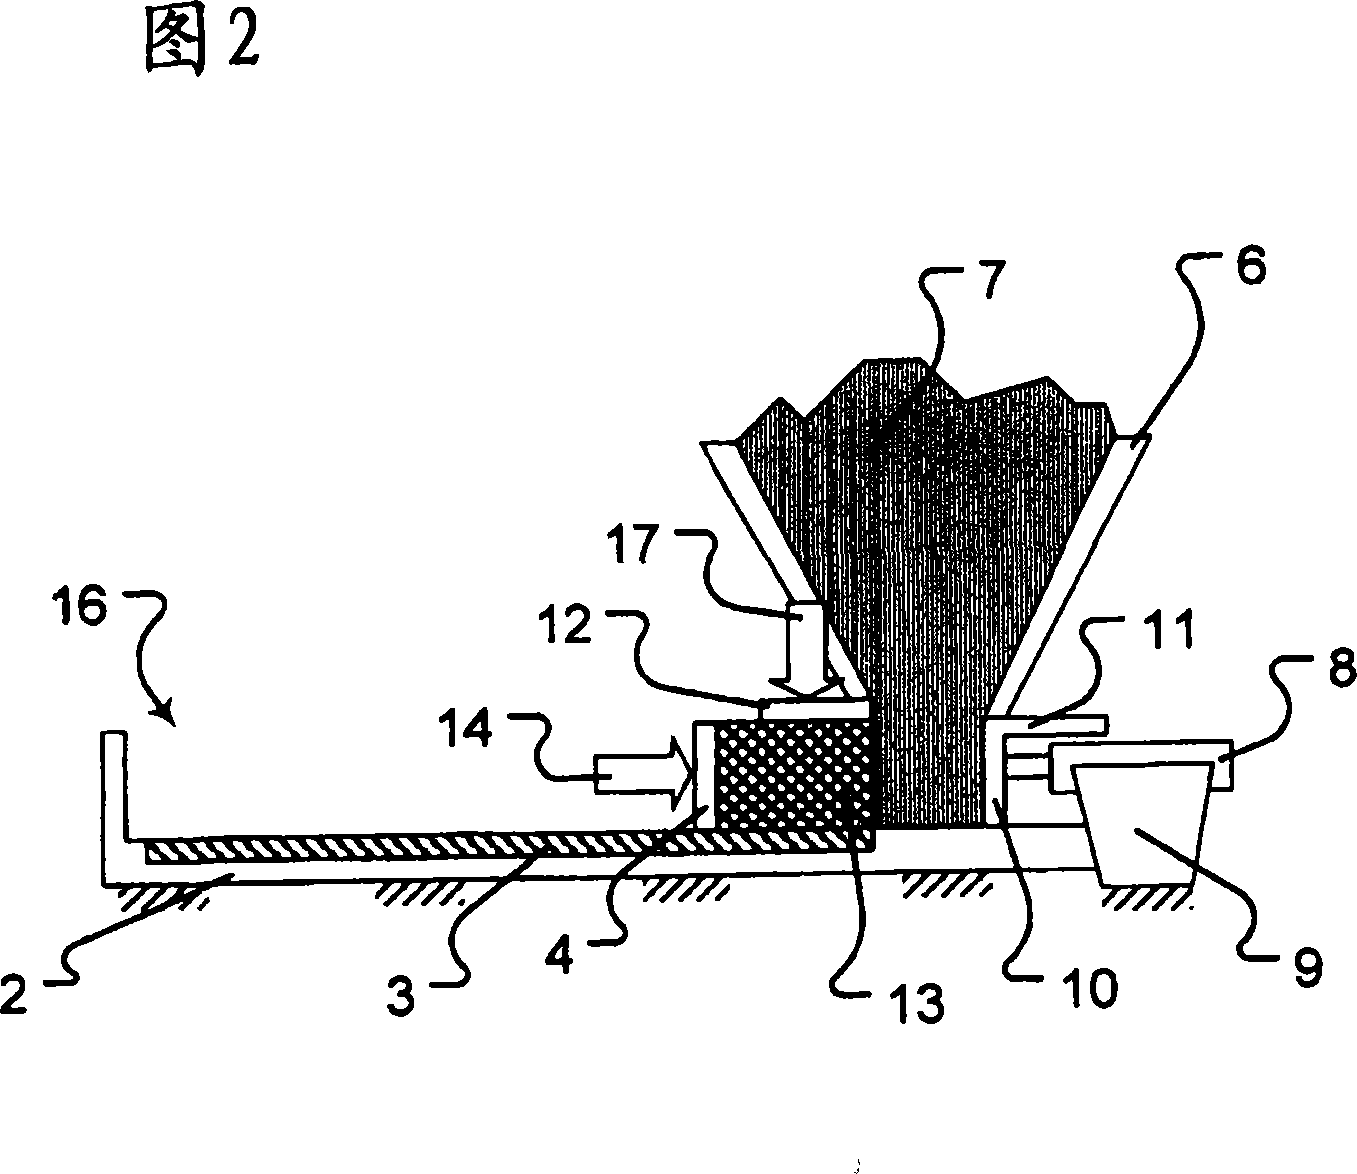 Process and device for producing horizontally tamped coal cakes